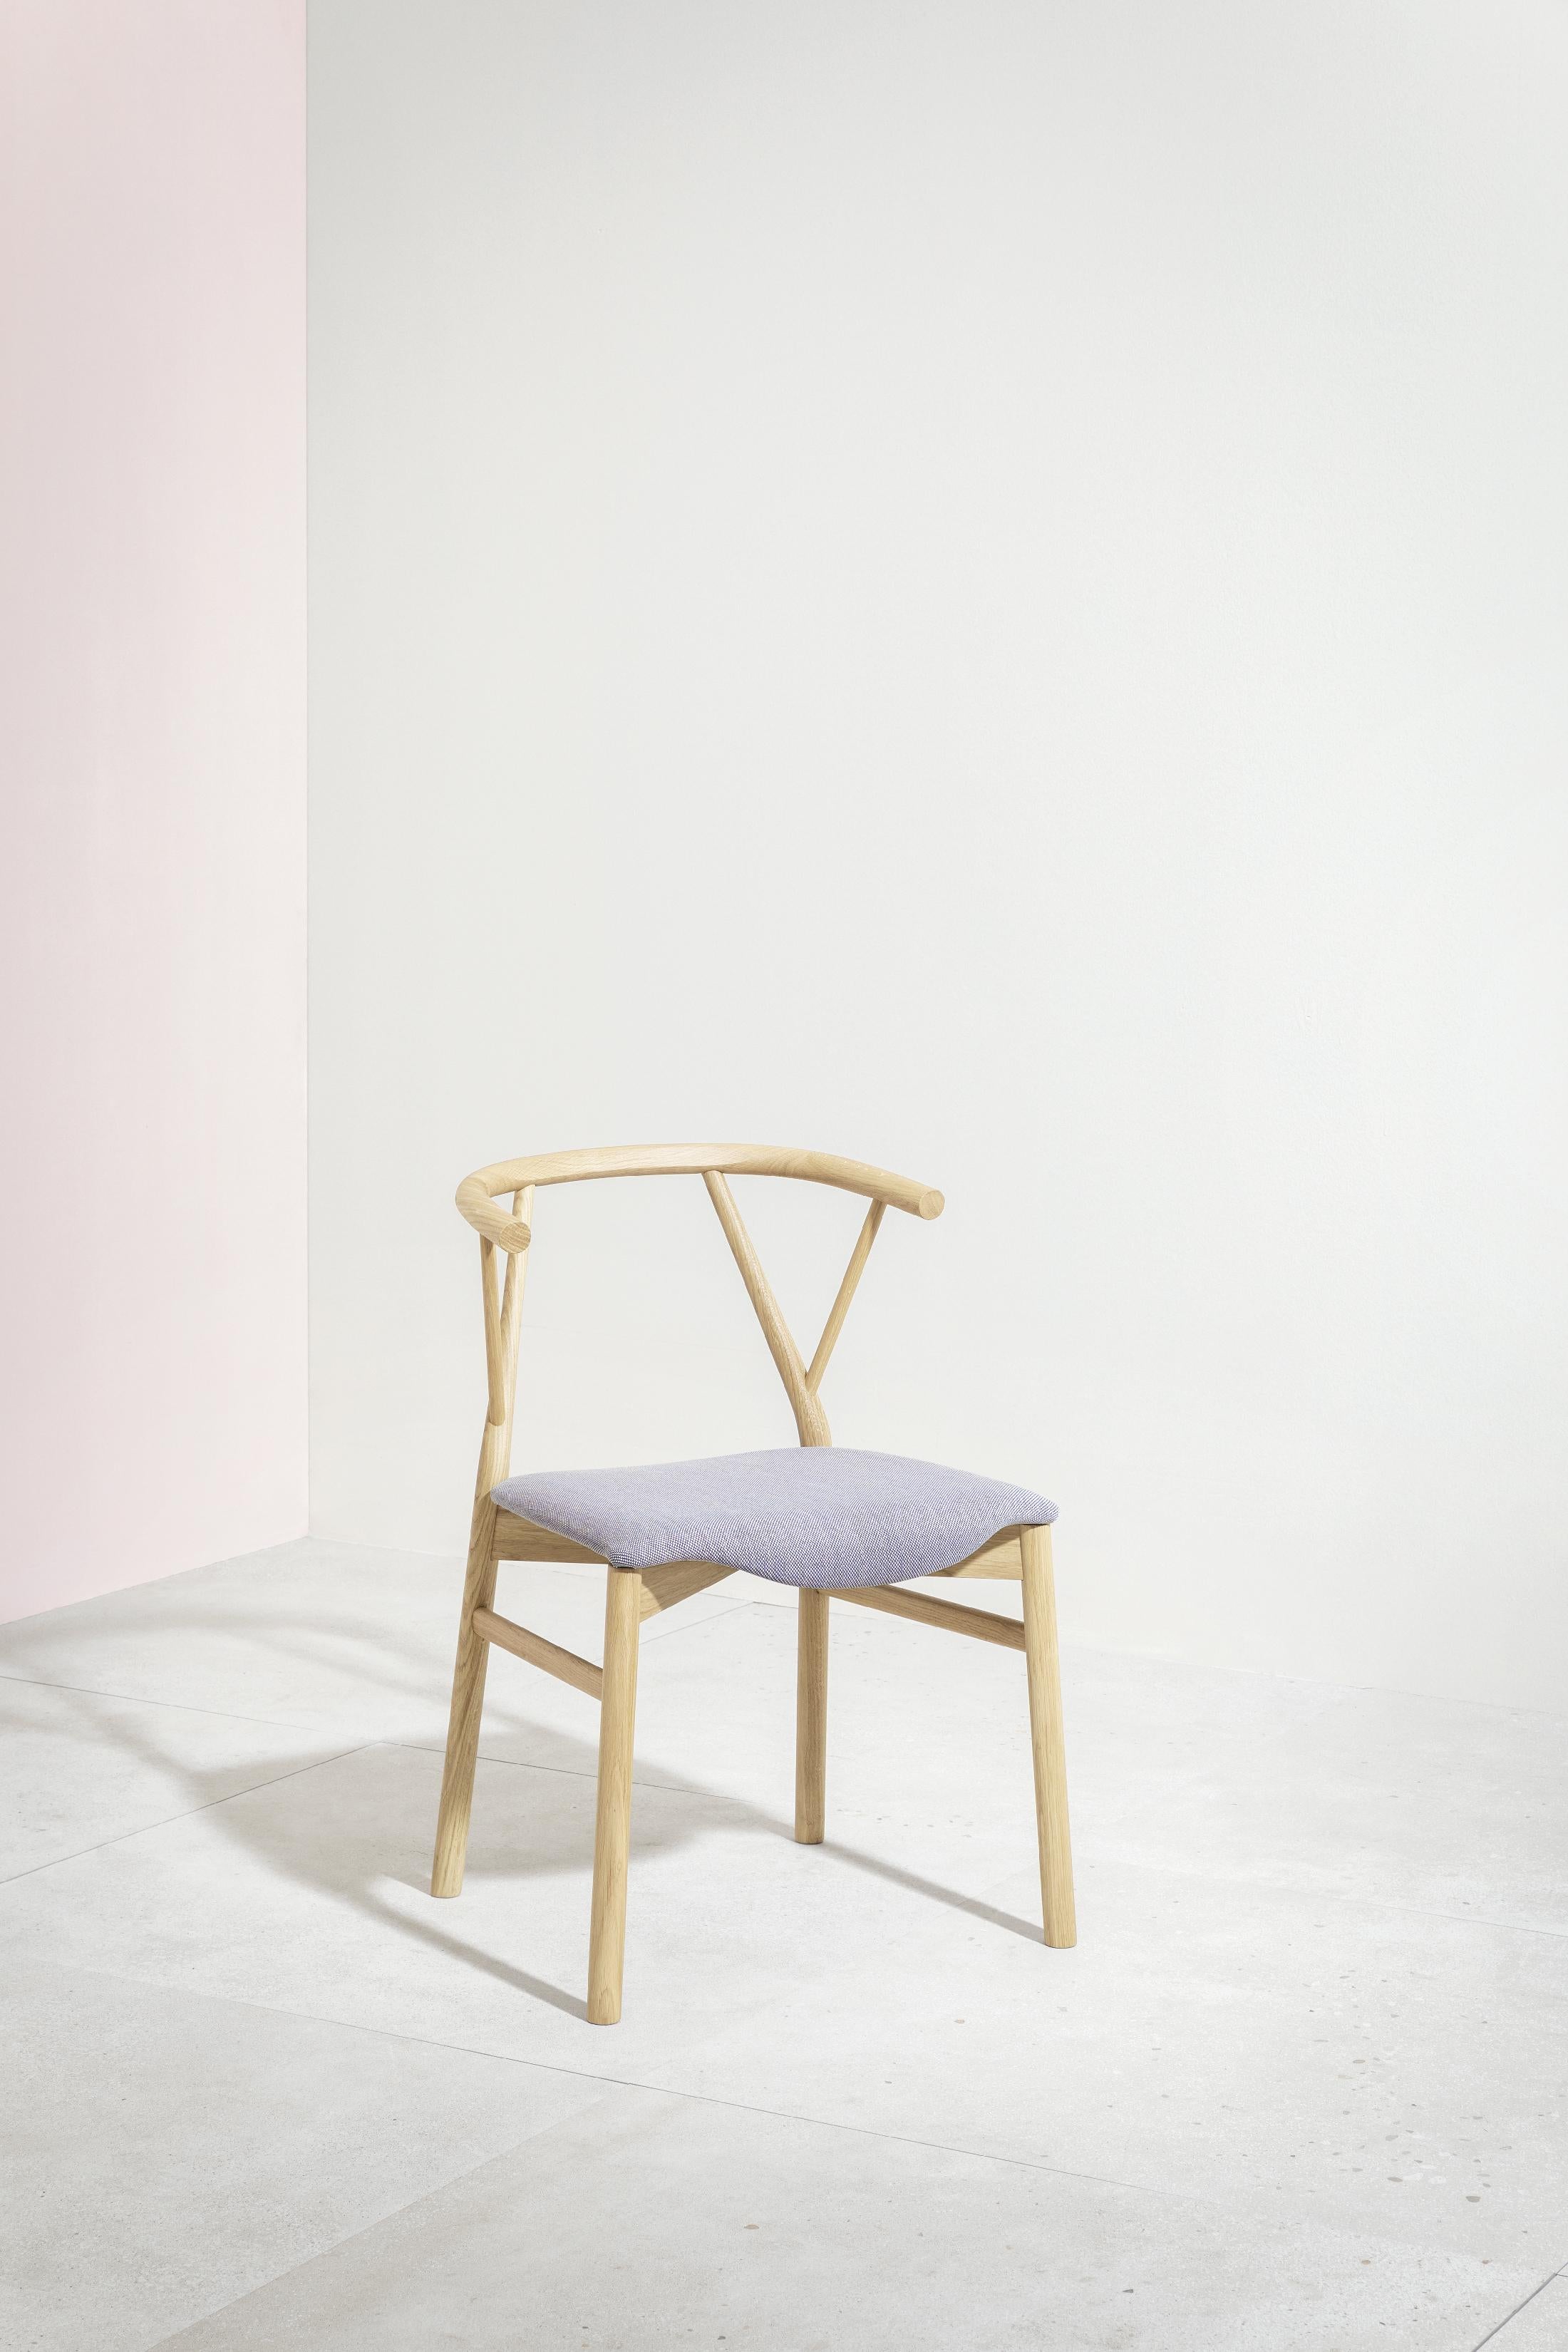 Valerie wants to be the expression of the archetype of the sitting, both in the material used and in the form. It doesn’t want to impress, but to fulfill its primary function: to welcome. The composition develops the contrast between the essential